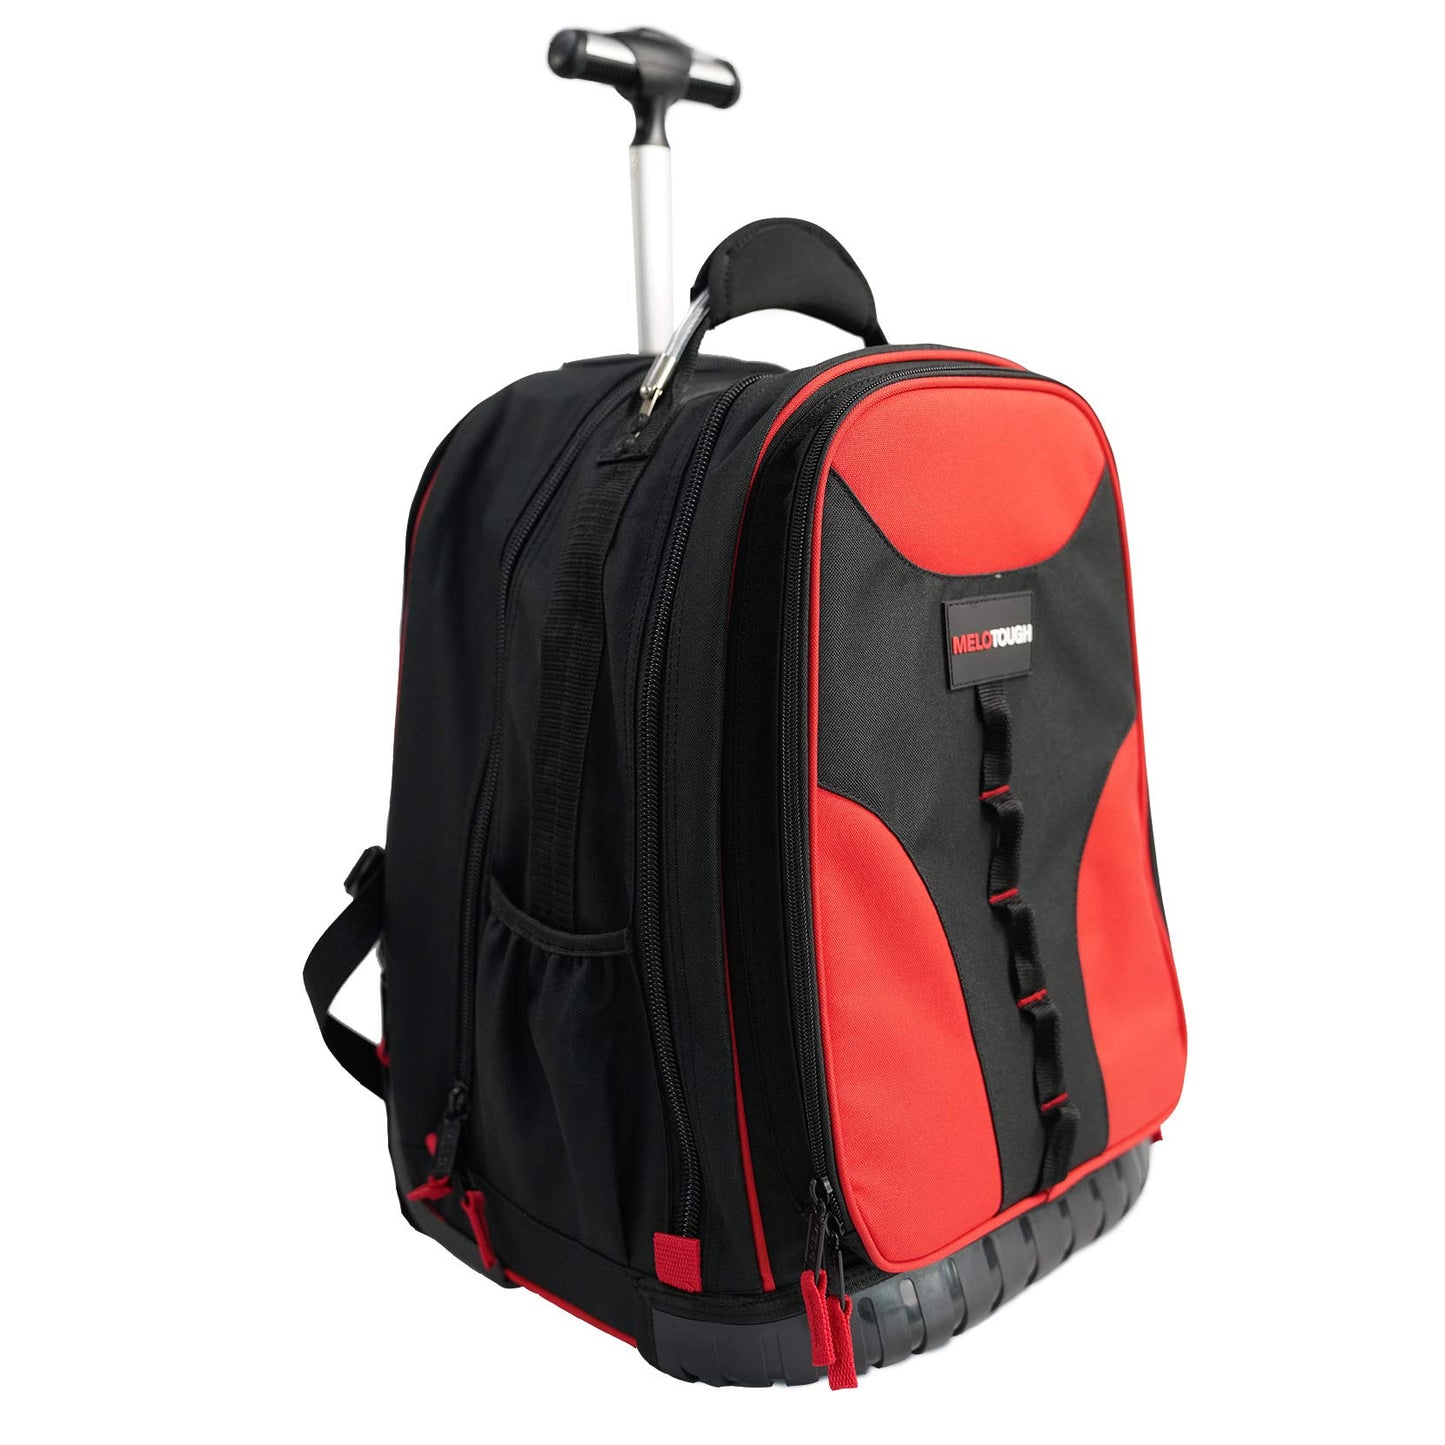 MELOTOUGH Wheeled Rolling Tool Backpack Heavy Duty Tradesman Pro Tool Organizer Including Laptop Sleeve (Red&Black)